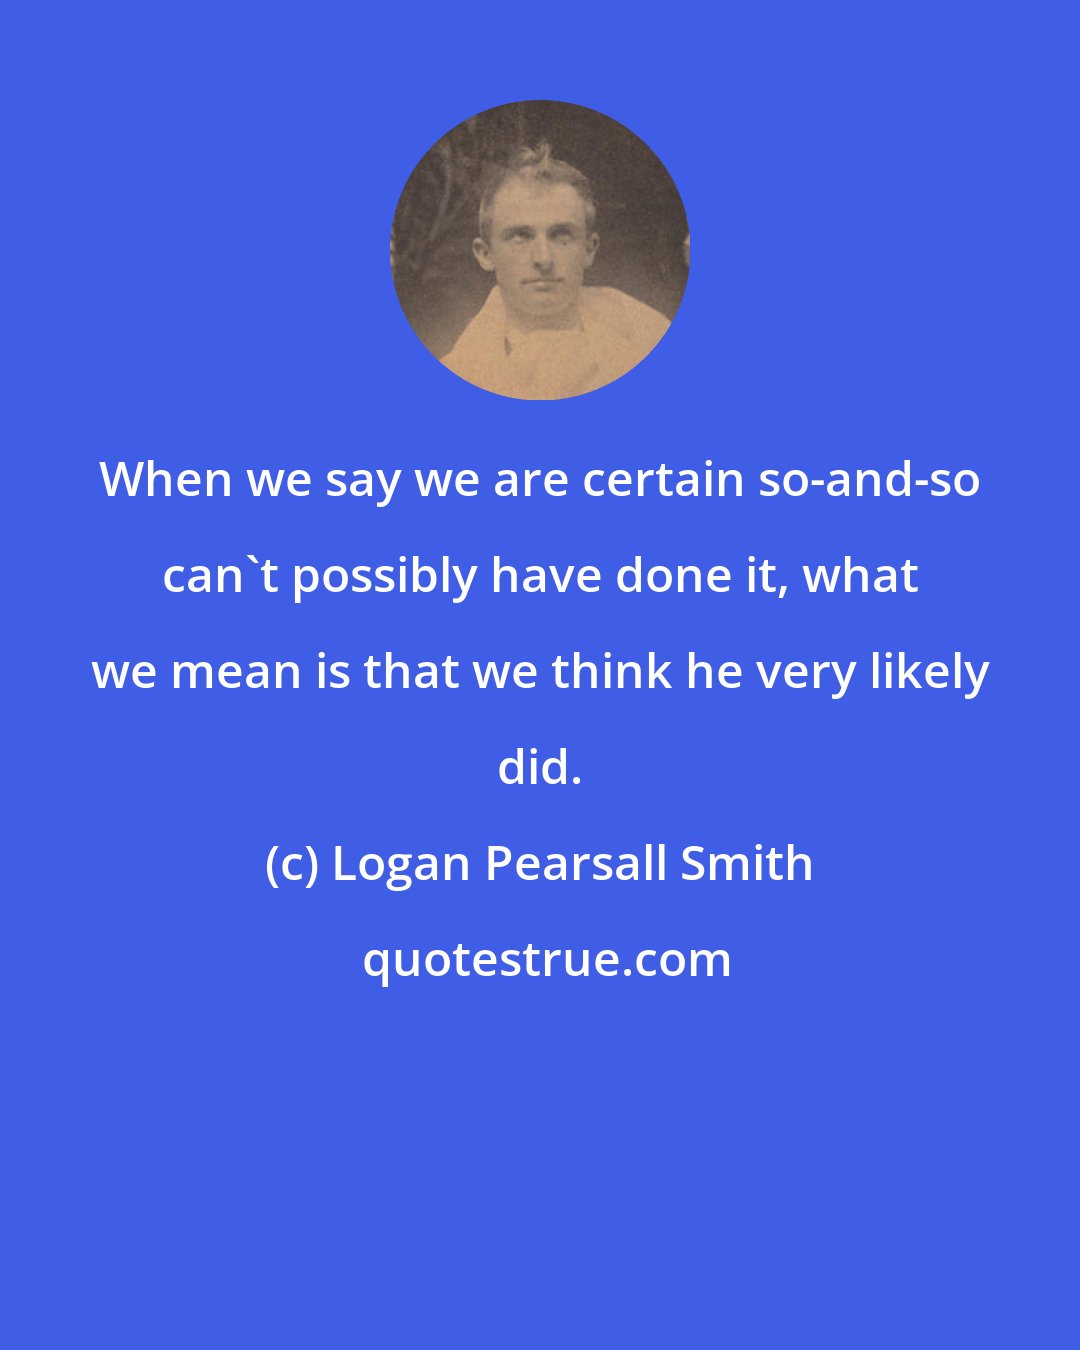 Logan Pearsall Smith: When we say we are certain so-and-so can't possibly have done it, what we mean is that we think he very likely did.